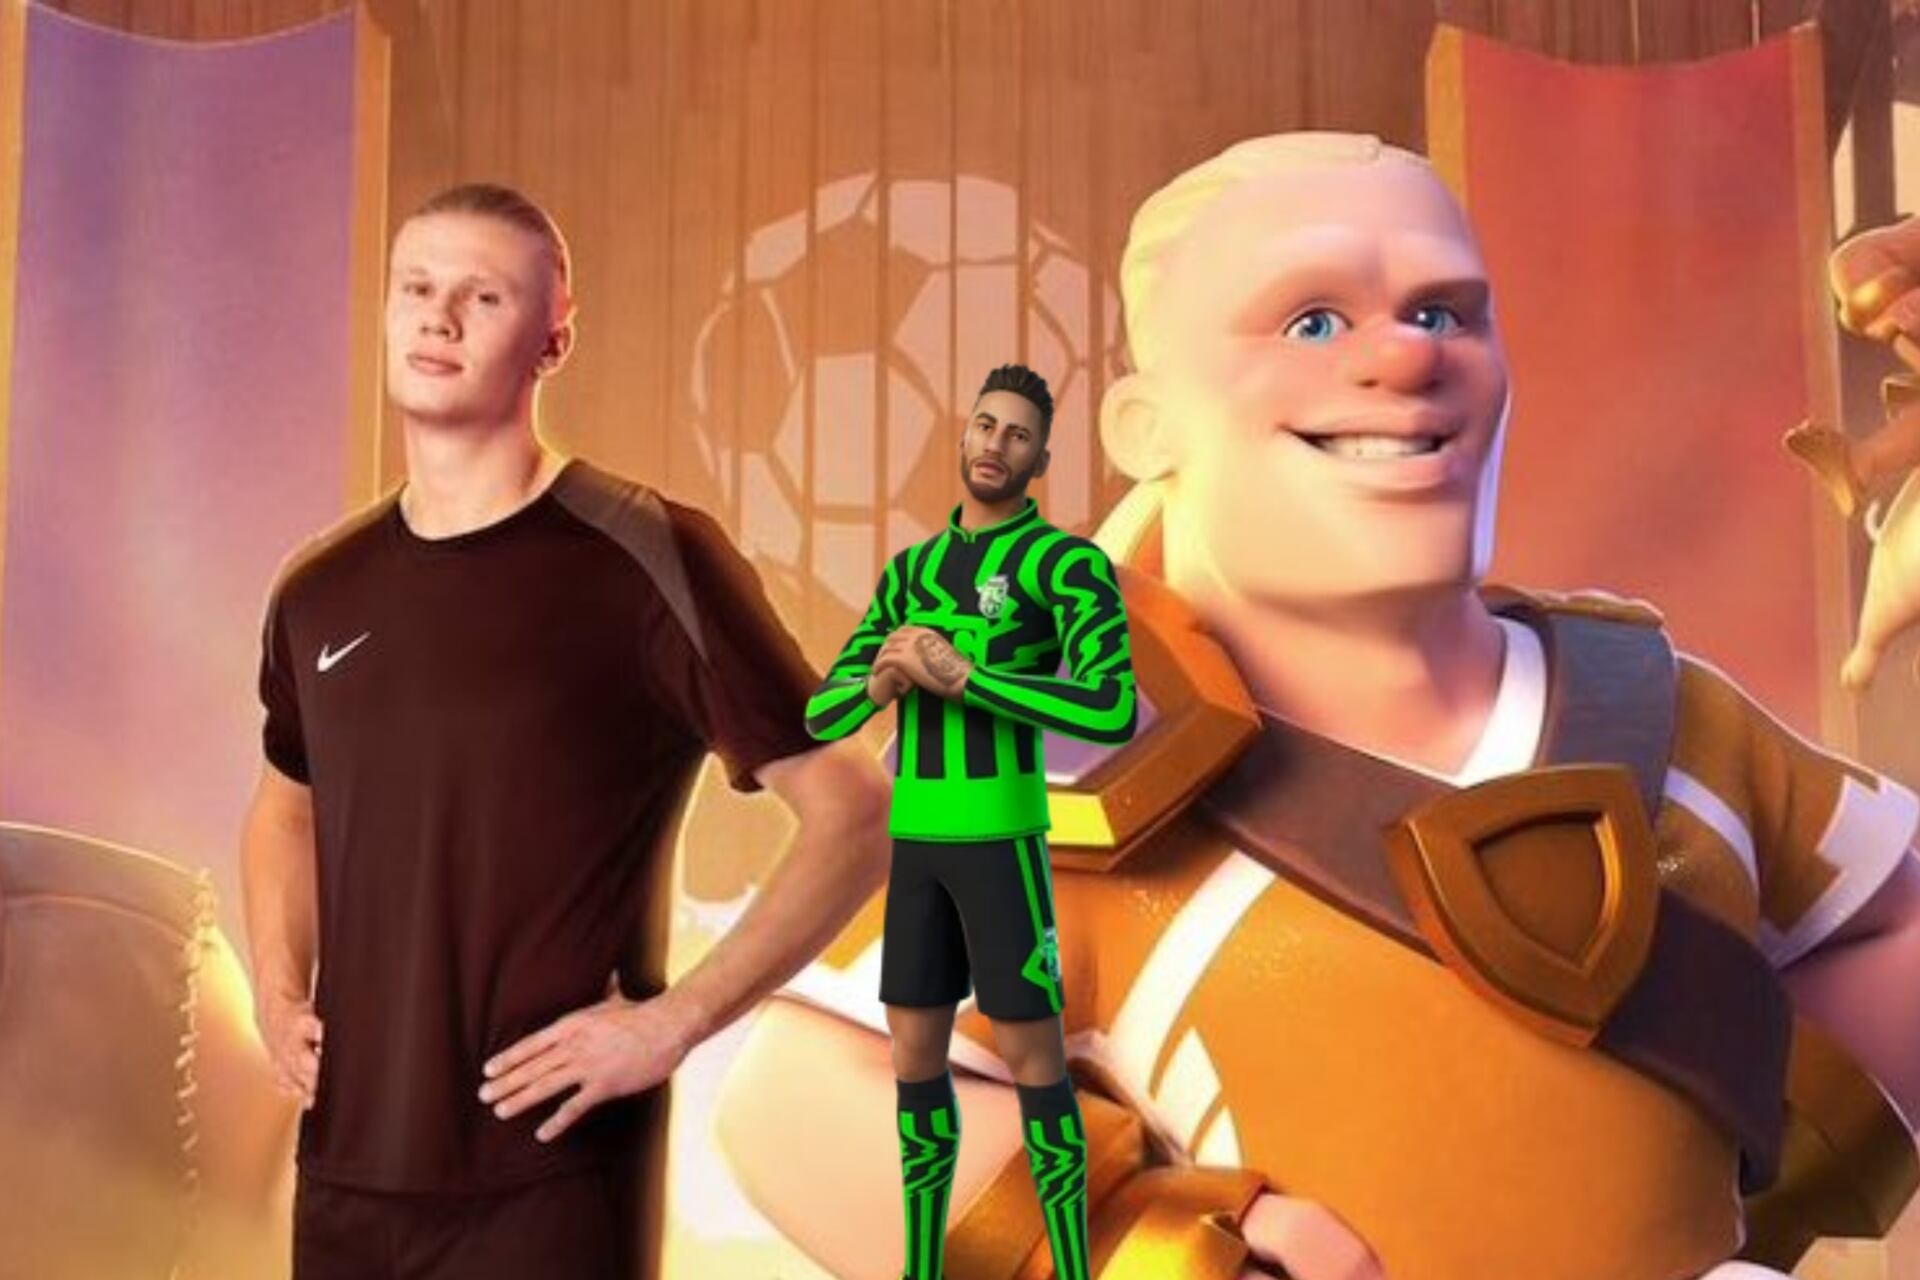 As Neymar in Fortnite, the millionaire contract of Haaland for appearing as a character in Clash of Clans